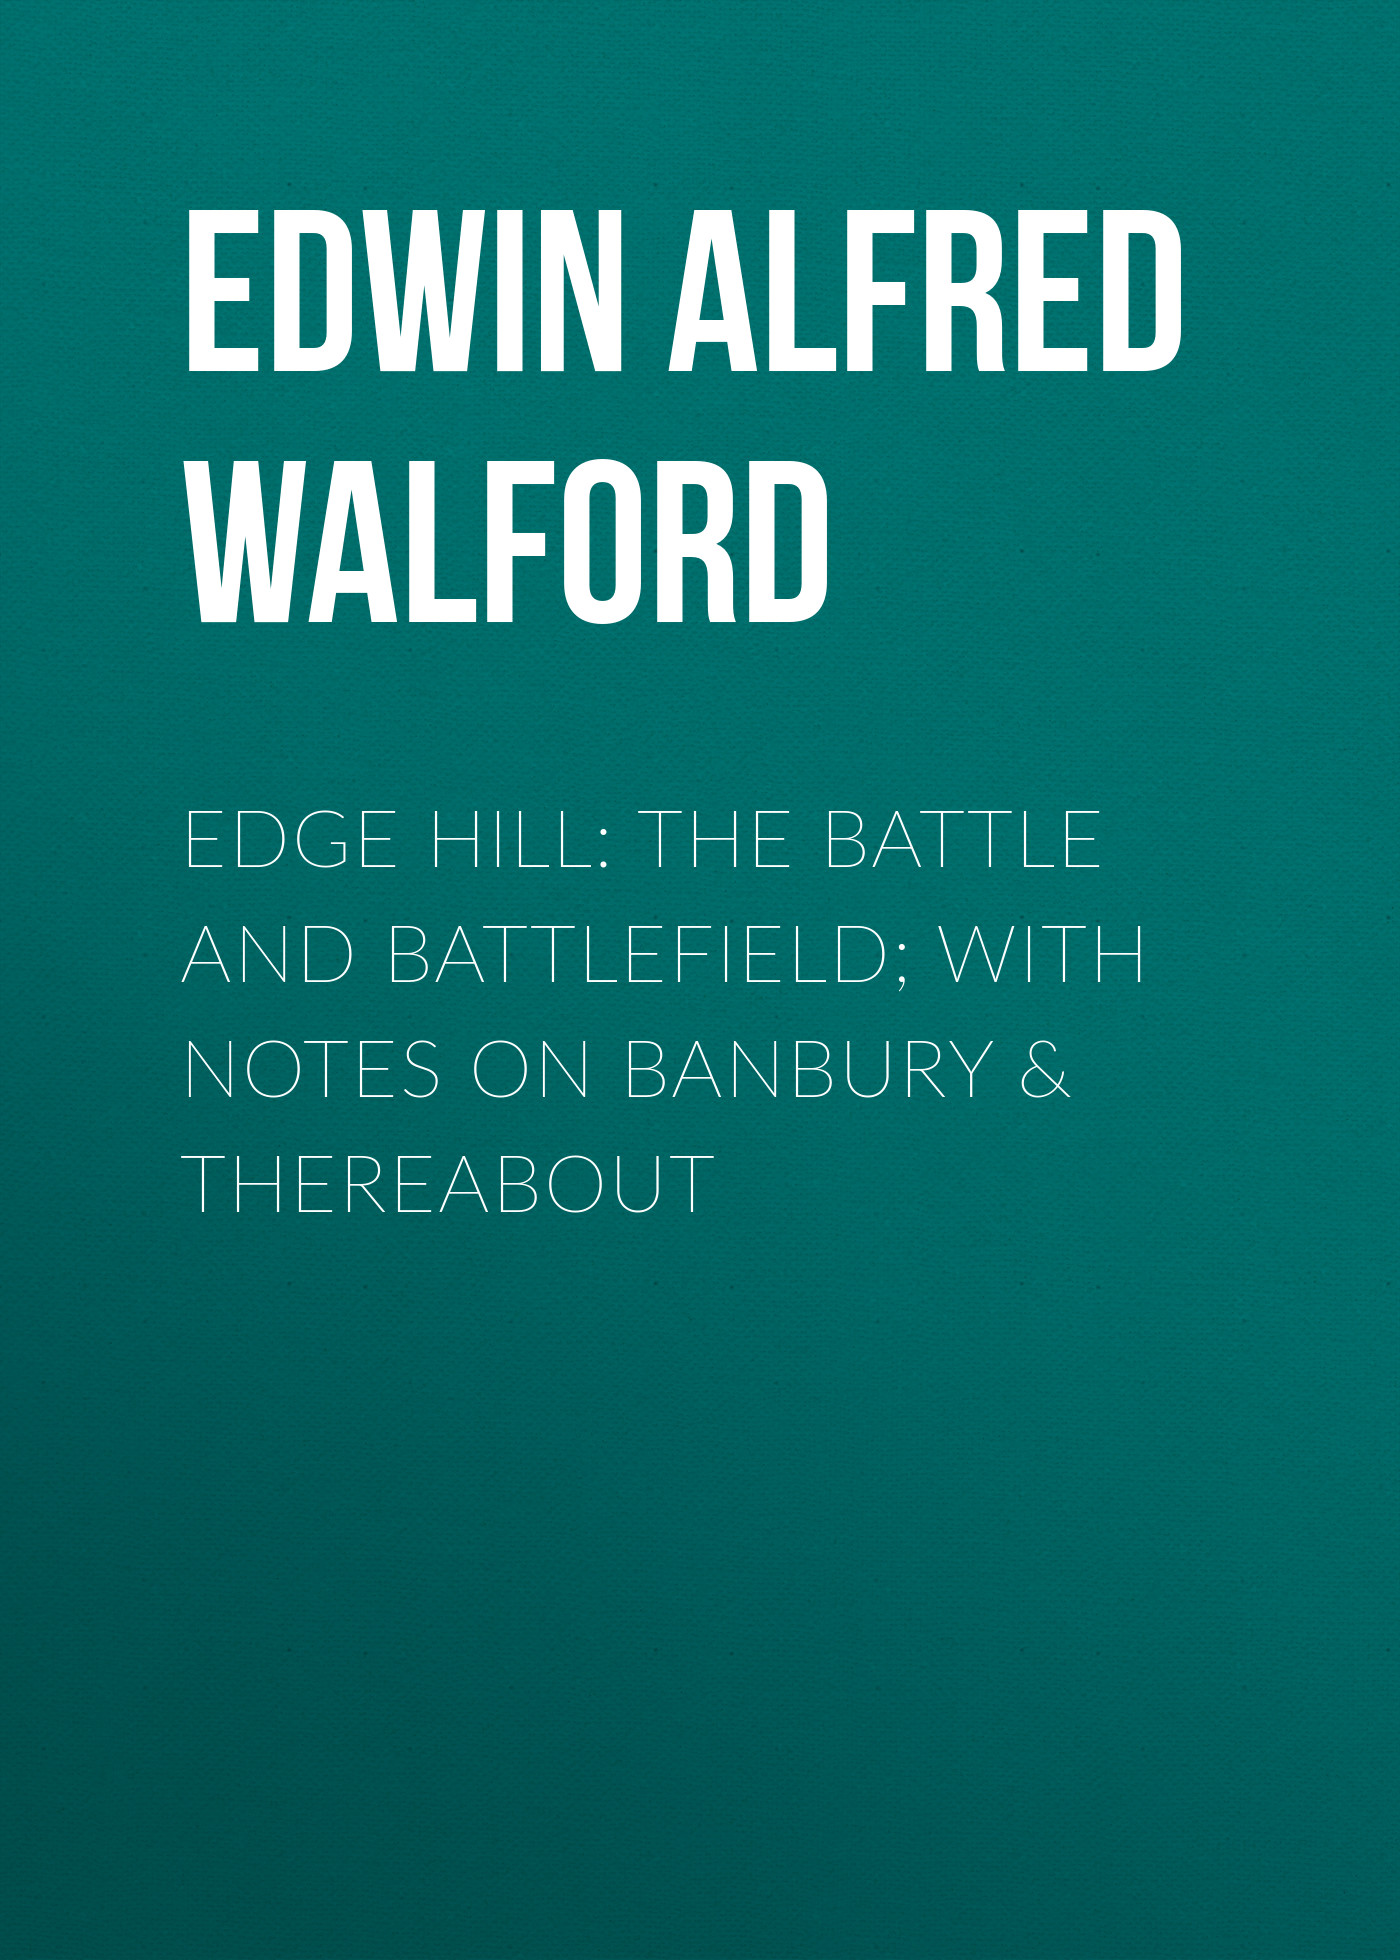 Edge Hill: The Battle and Battlefield; With Notes on Banbury&Thereabout